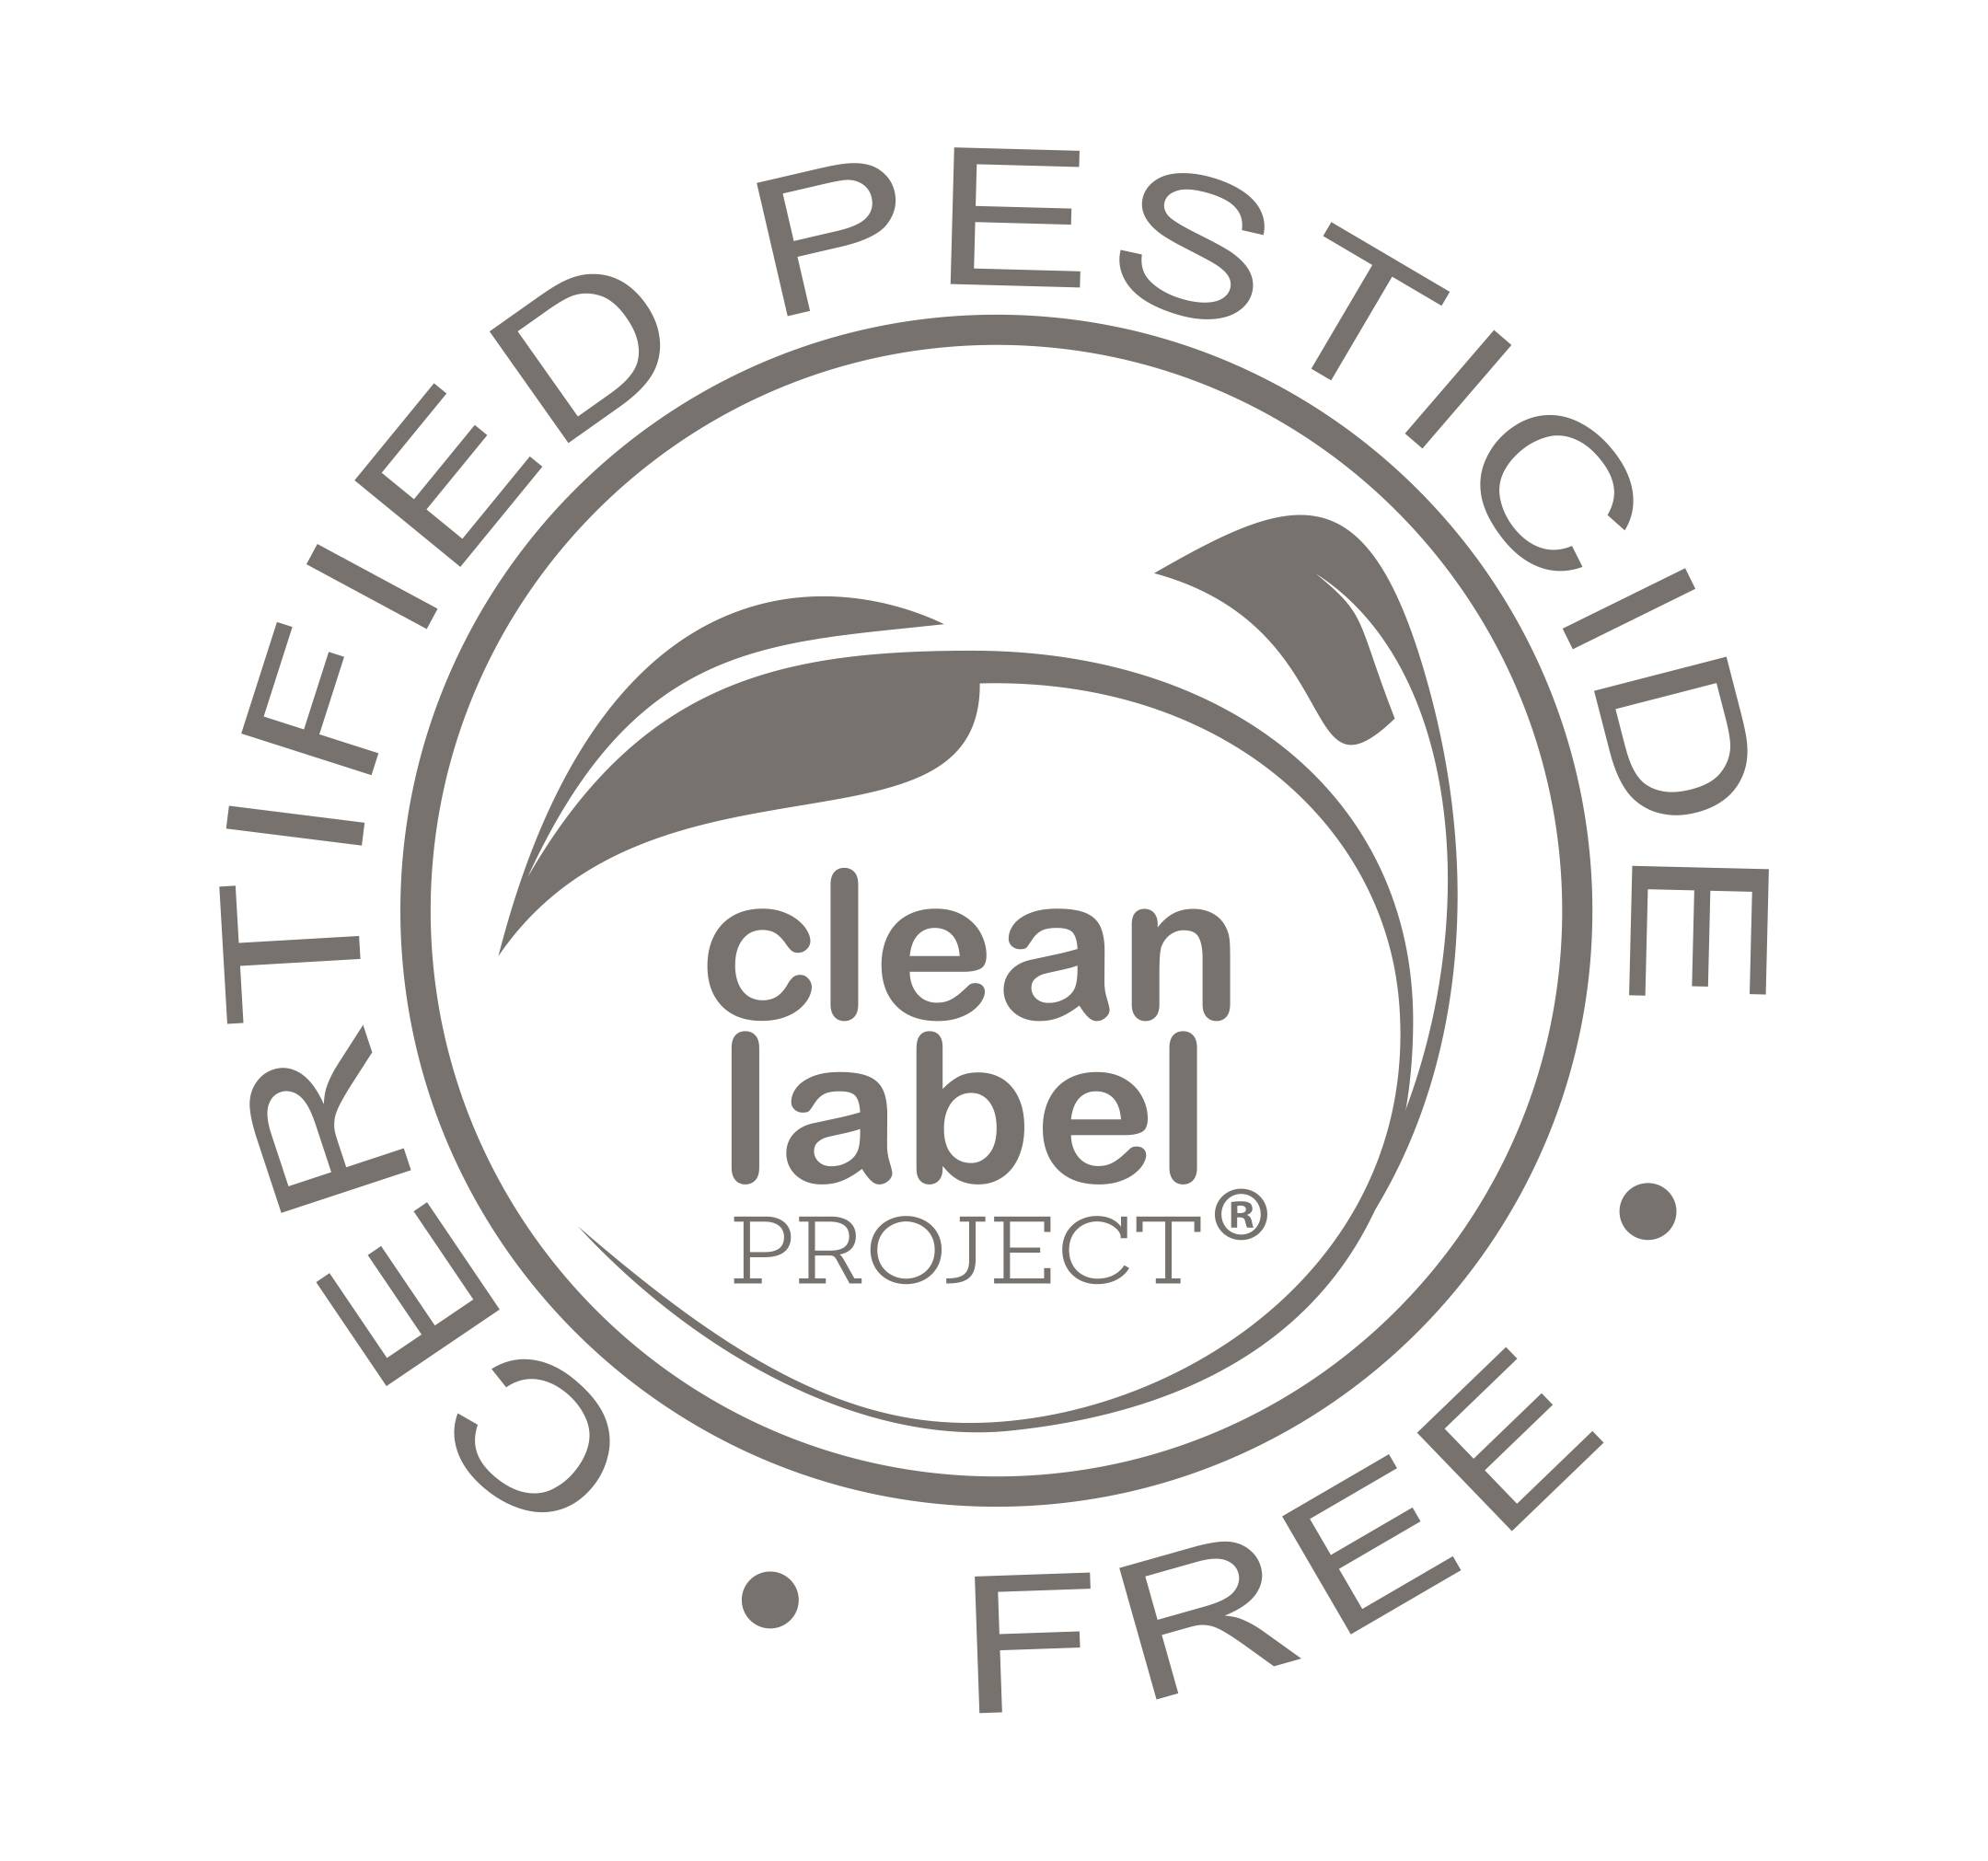 Clean Label Project Certified Pesticide Free logo